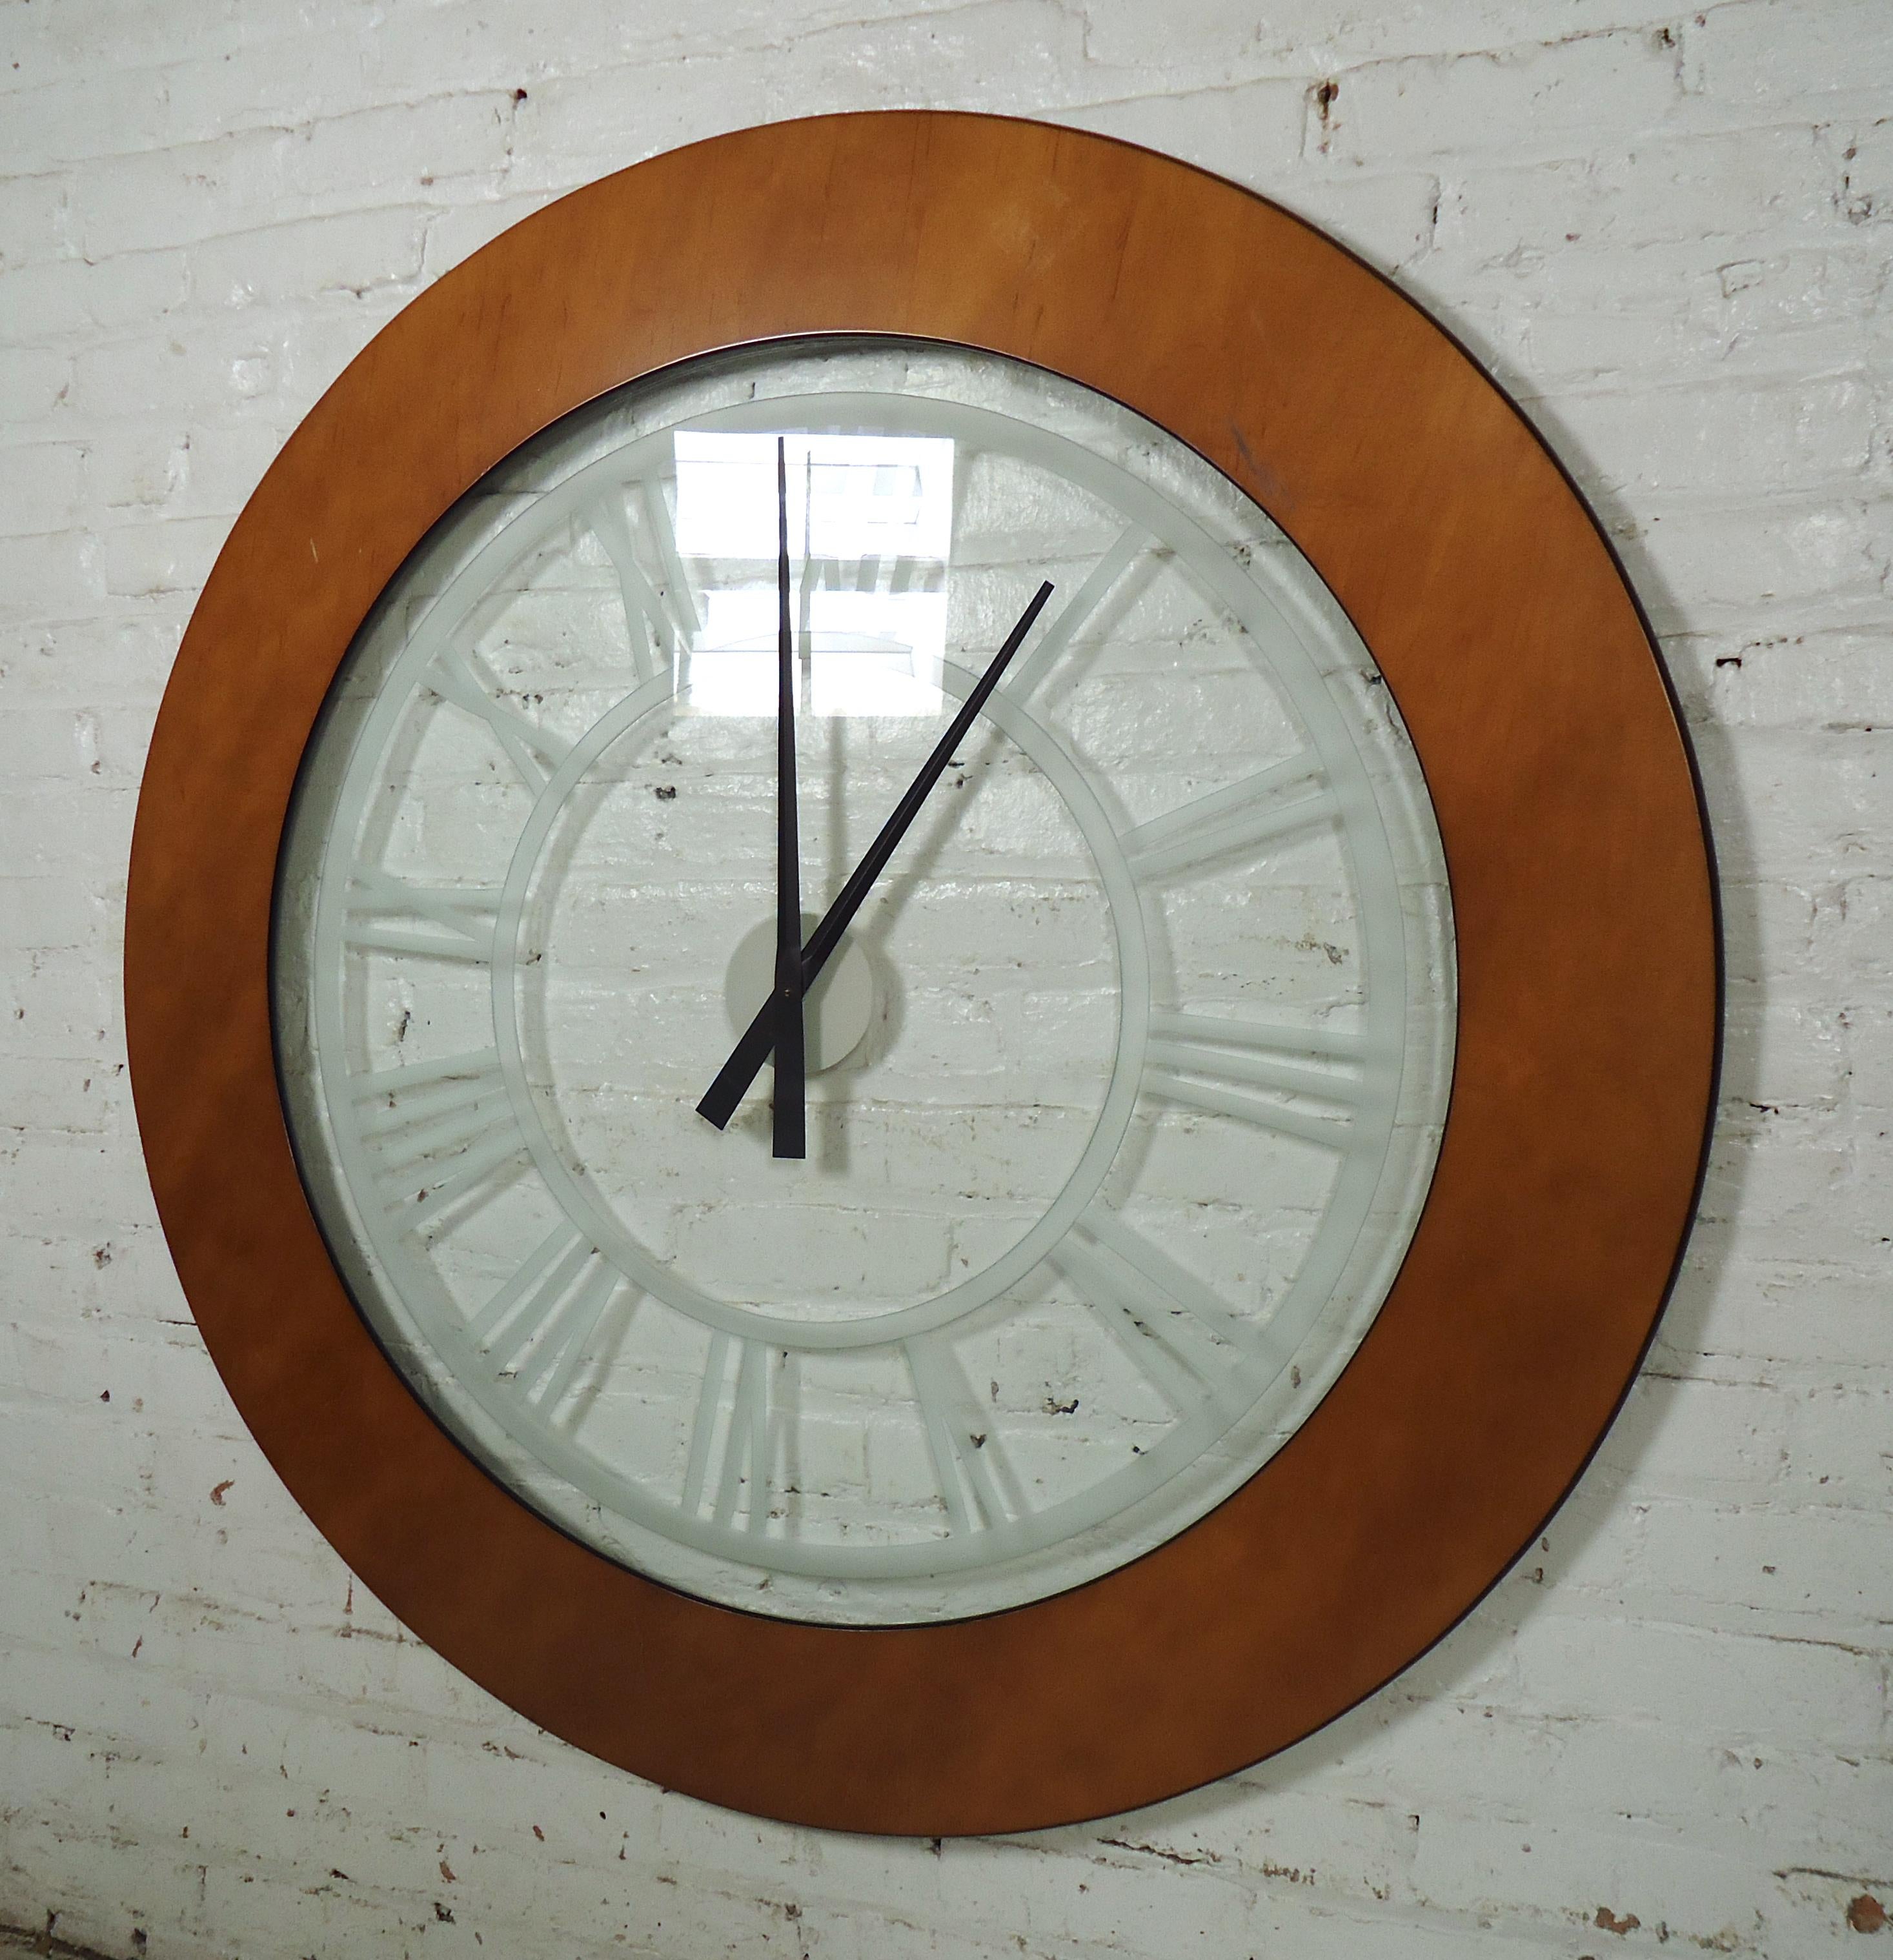 Mid-Century Modern style wall clock features a large transparent center with a wood veneer frame.

(Please confirm item location - NY or NJ - with dealer).